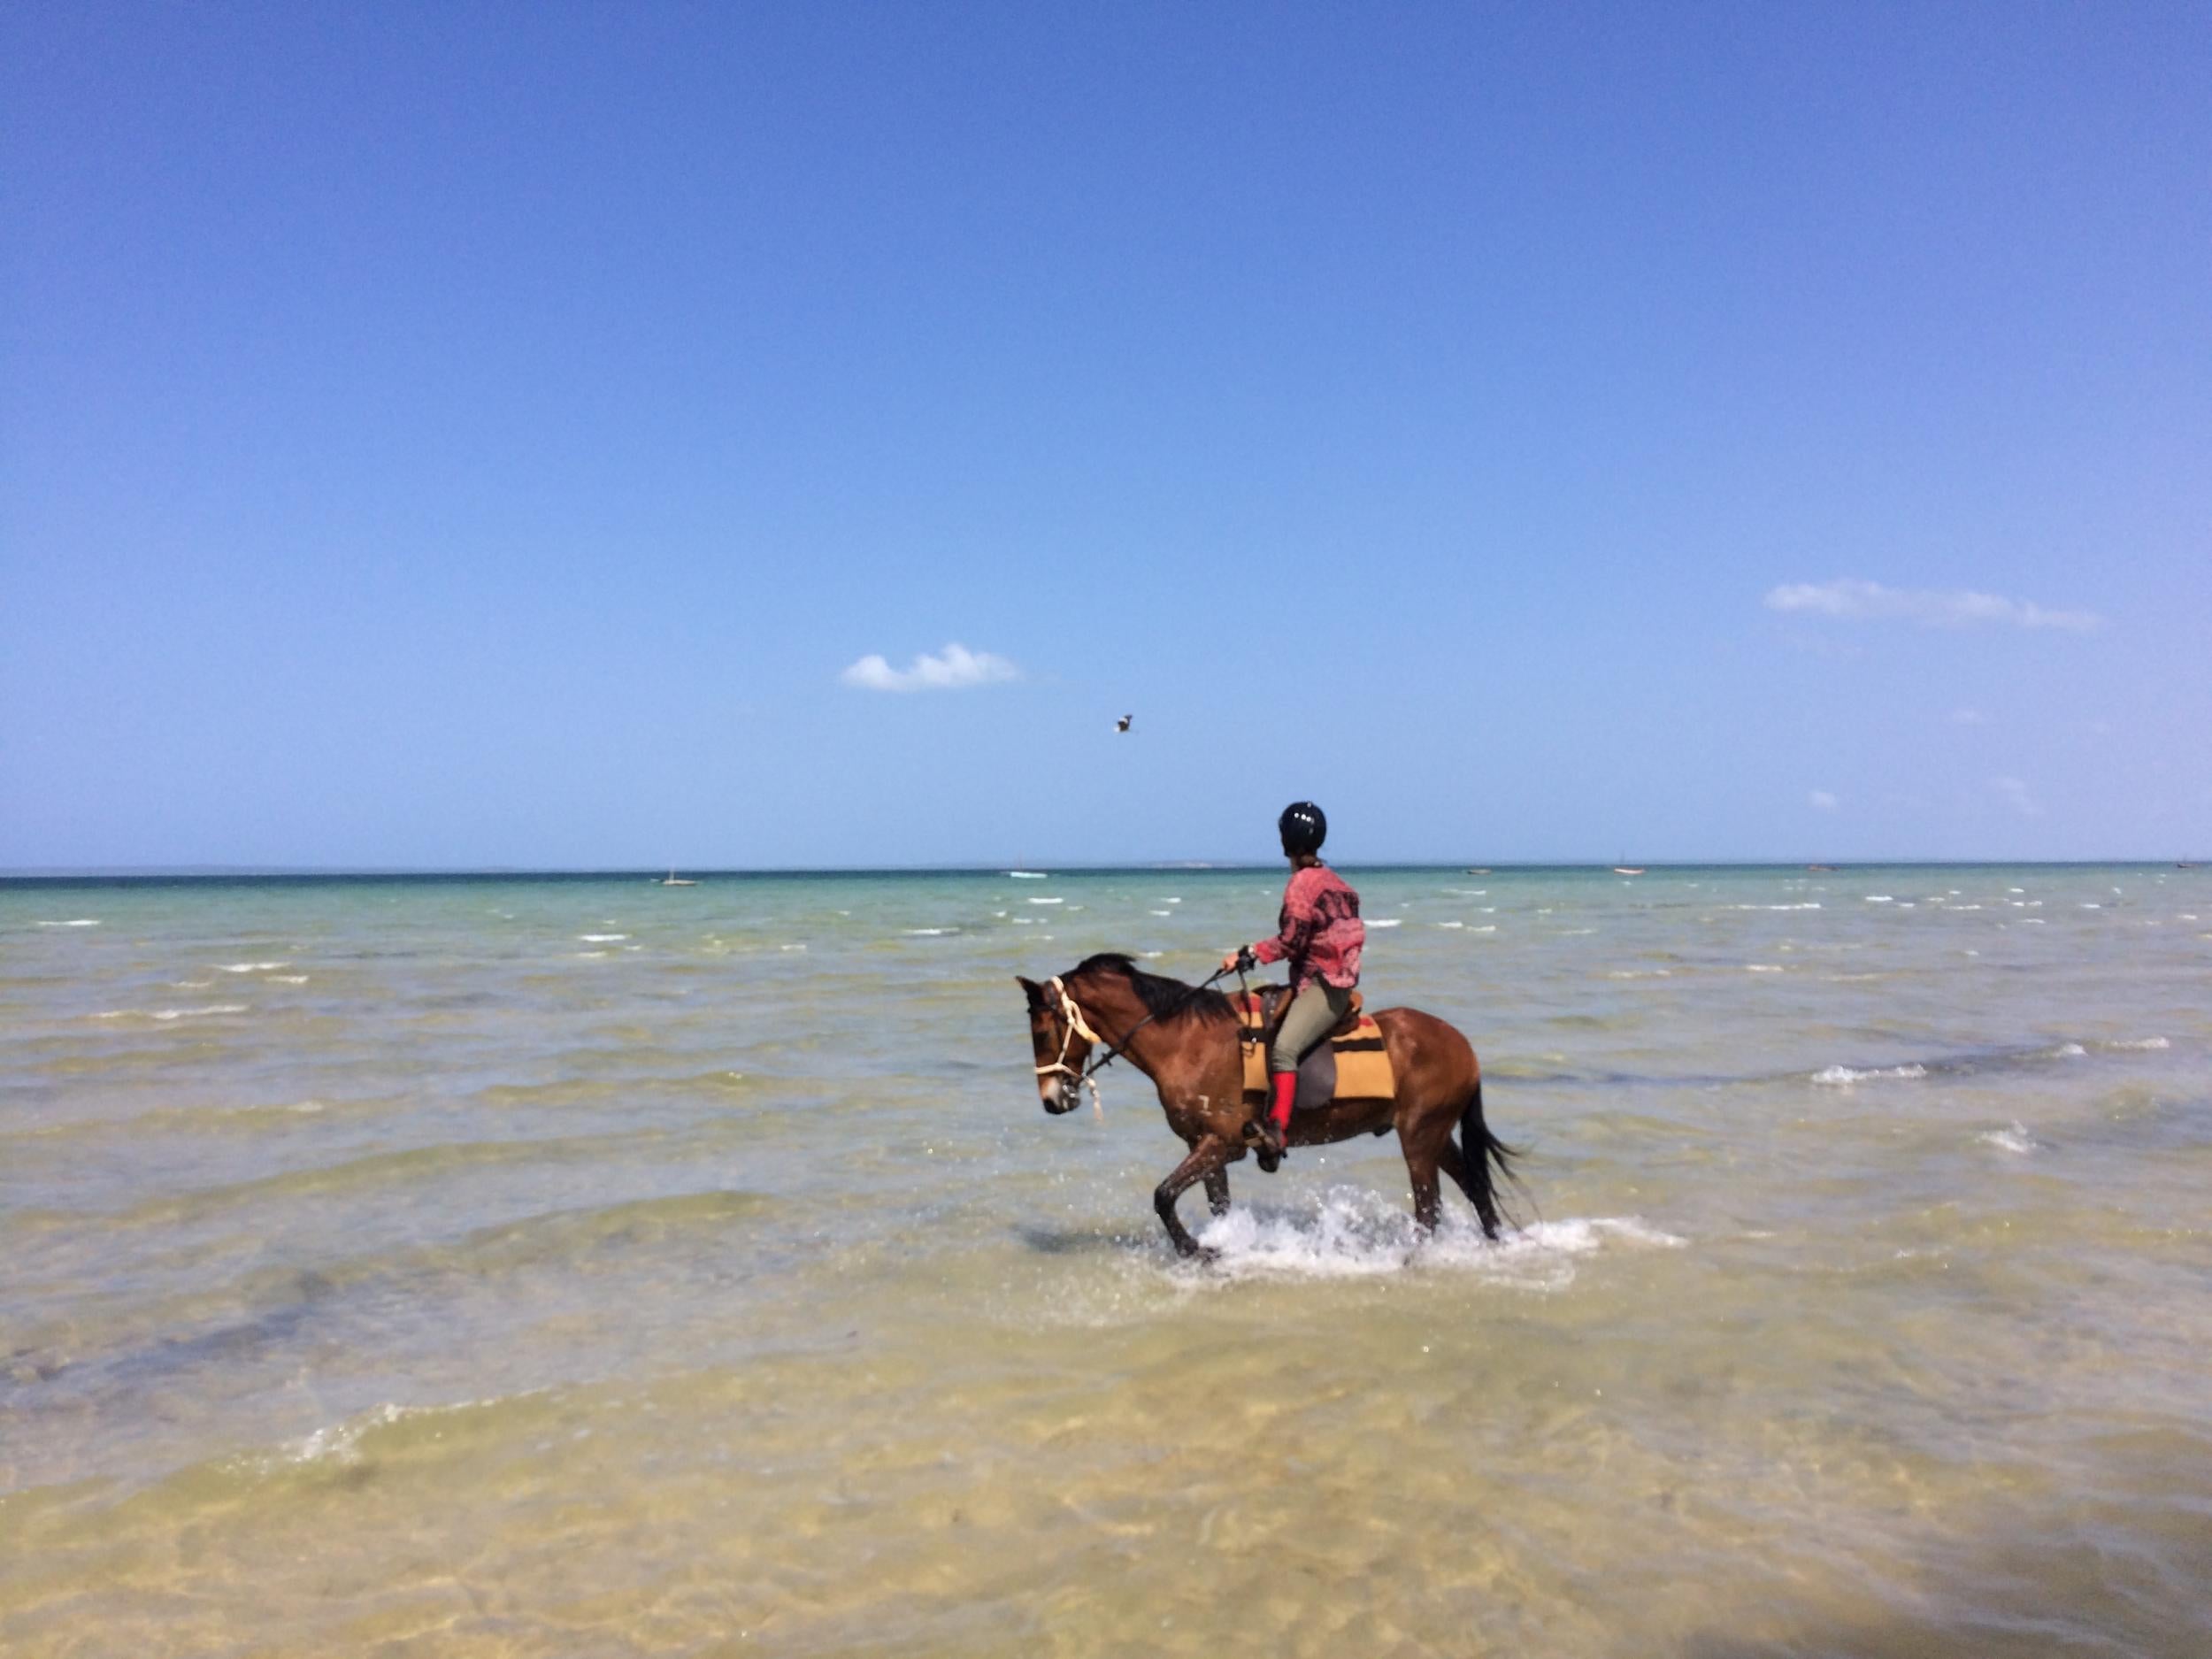 The horses bounce happily into the sea